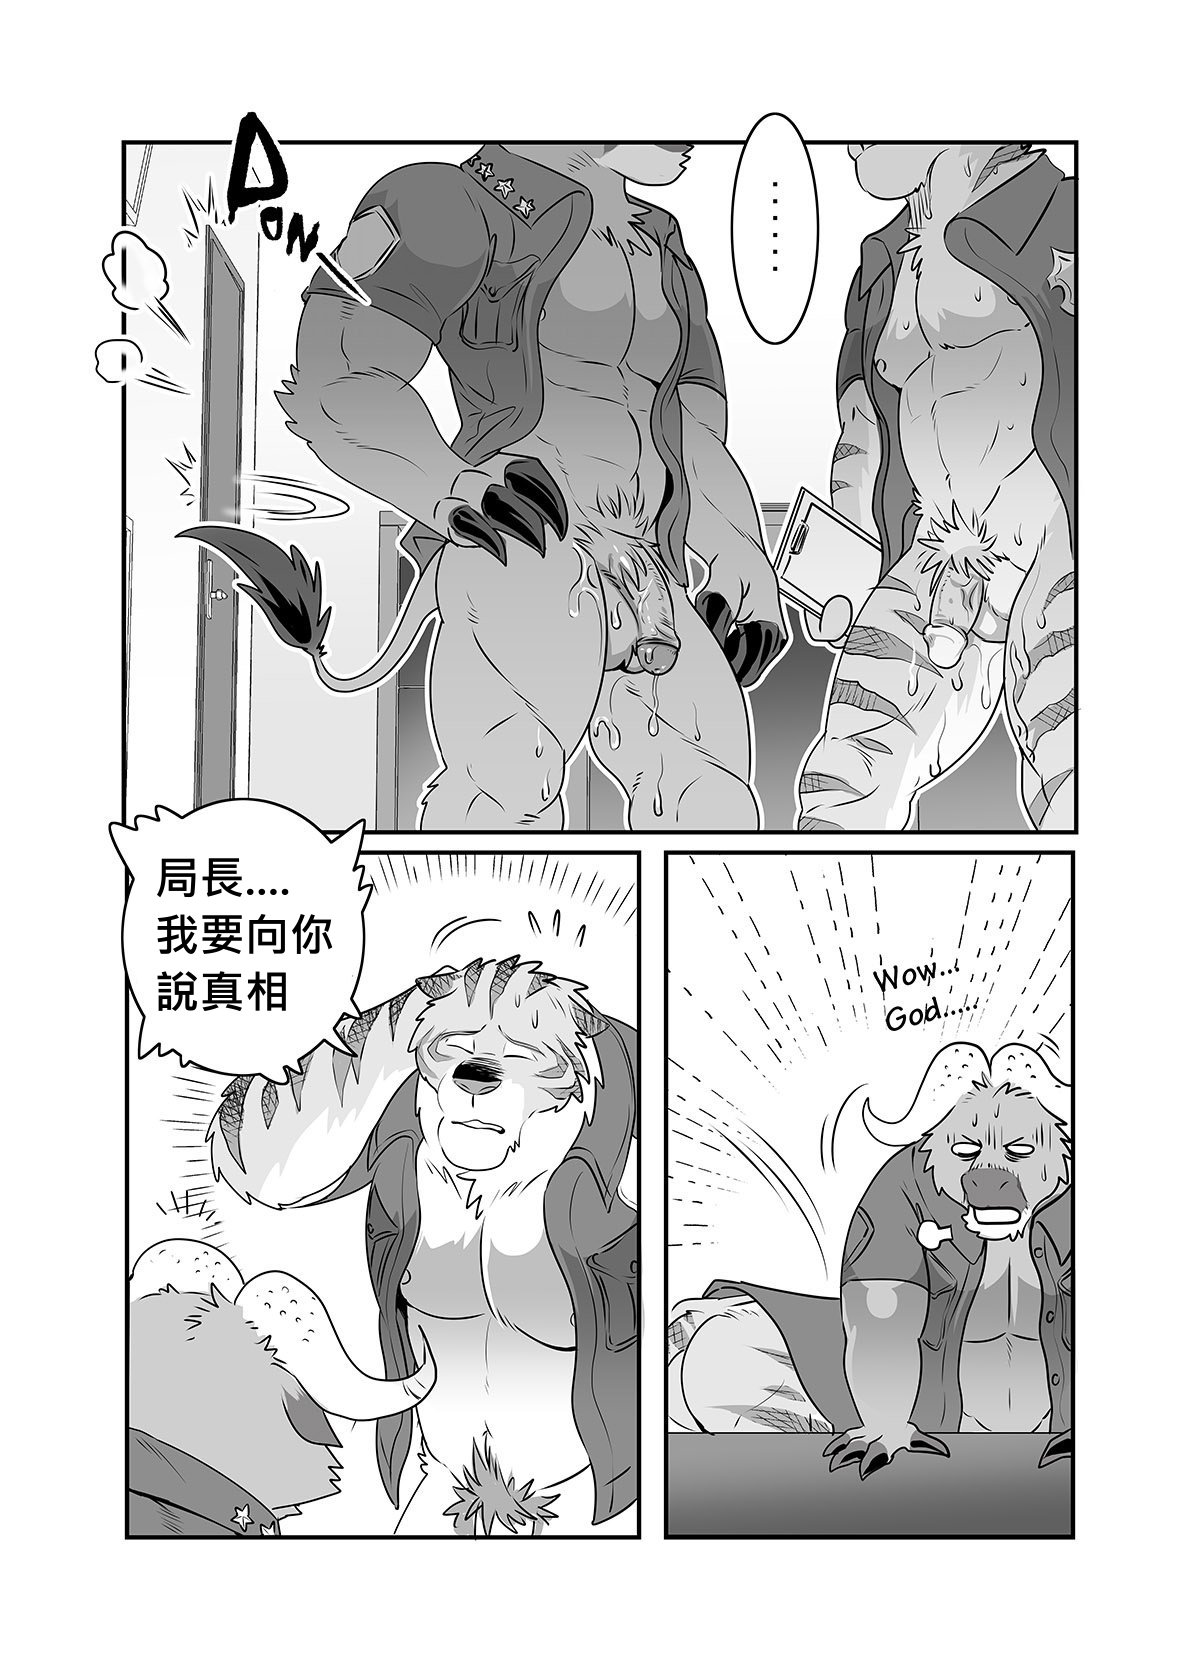 [Kuma Hachi] chief bogo found a dirty police (fixed version) [Chinese] 